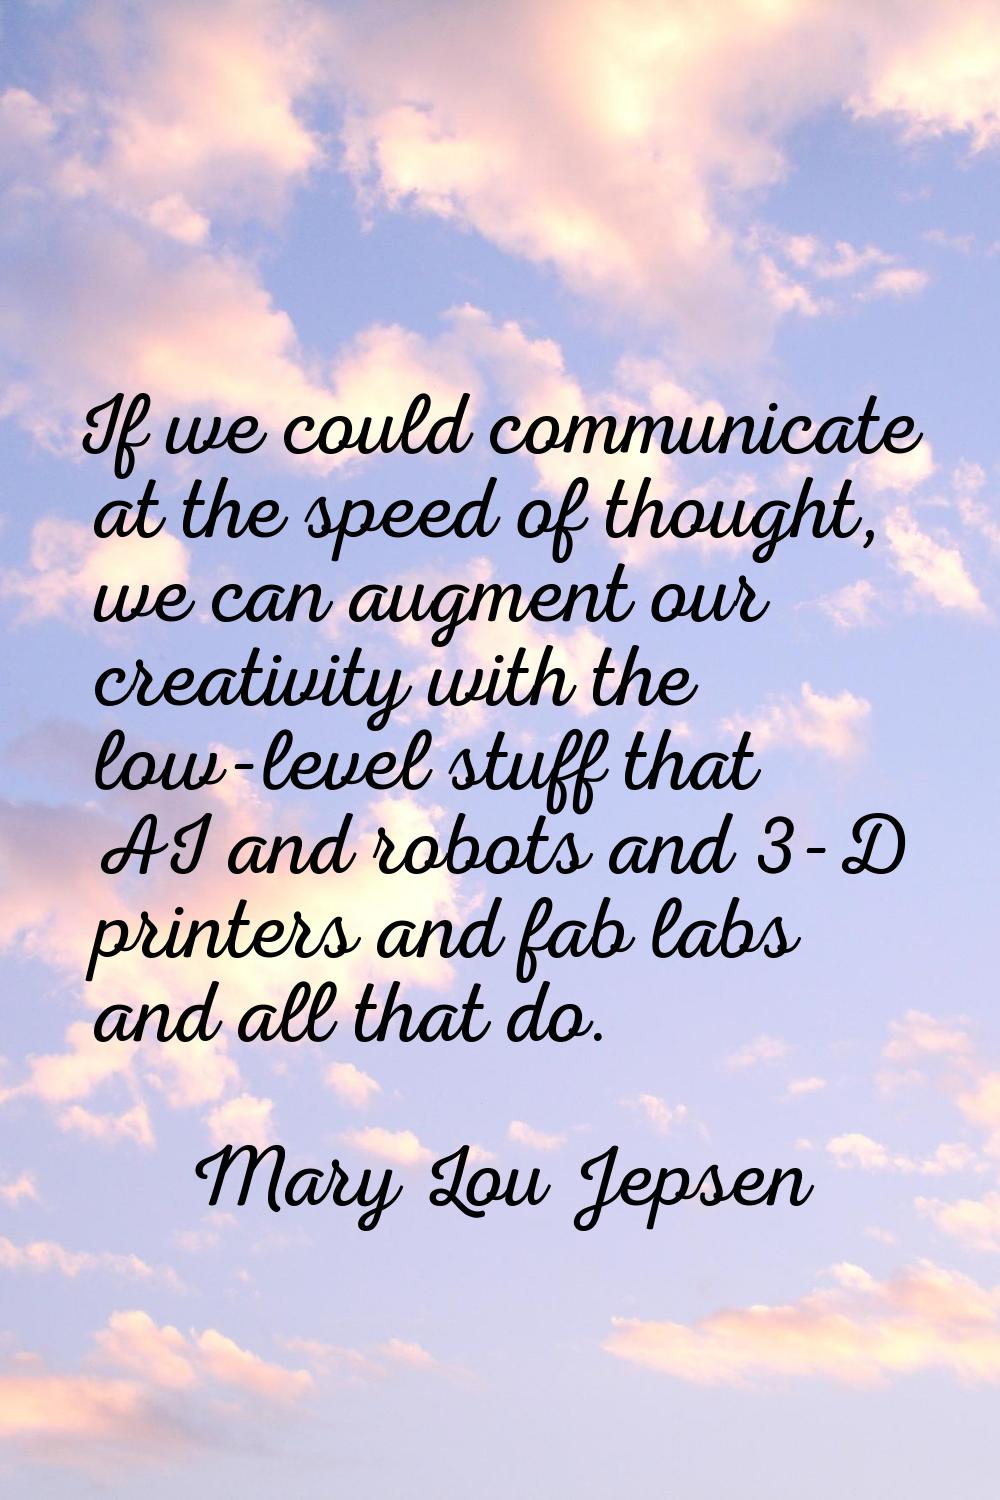 If we could communicate at the speed of thought, we can augment our creativity with the low-level s